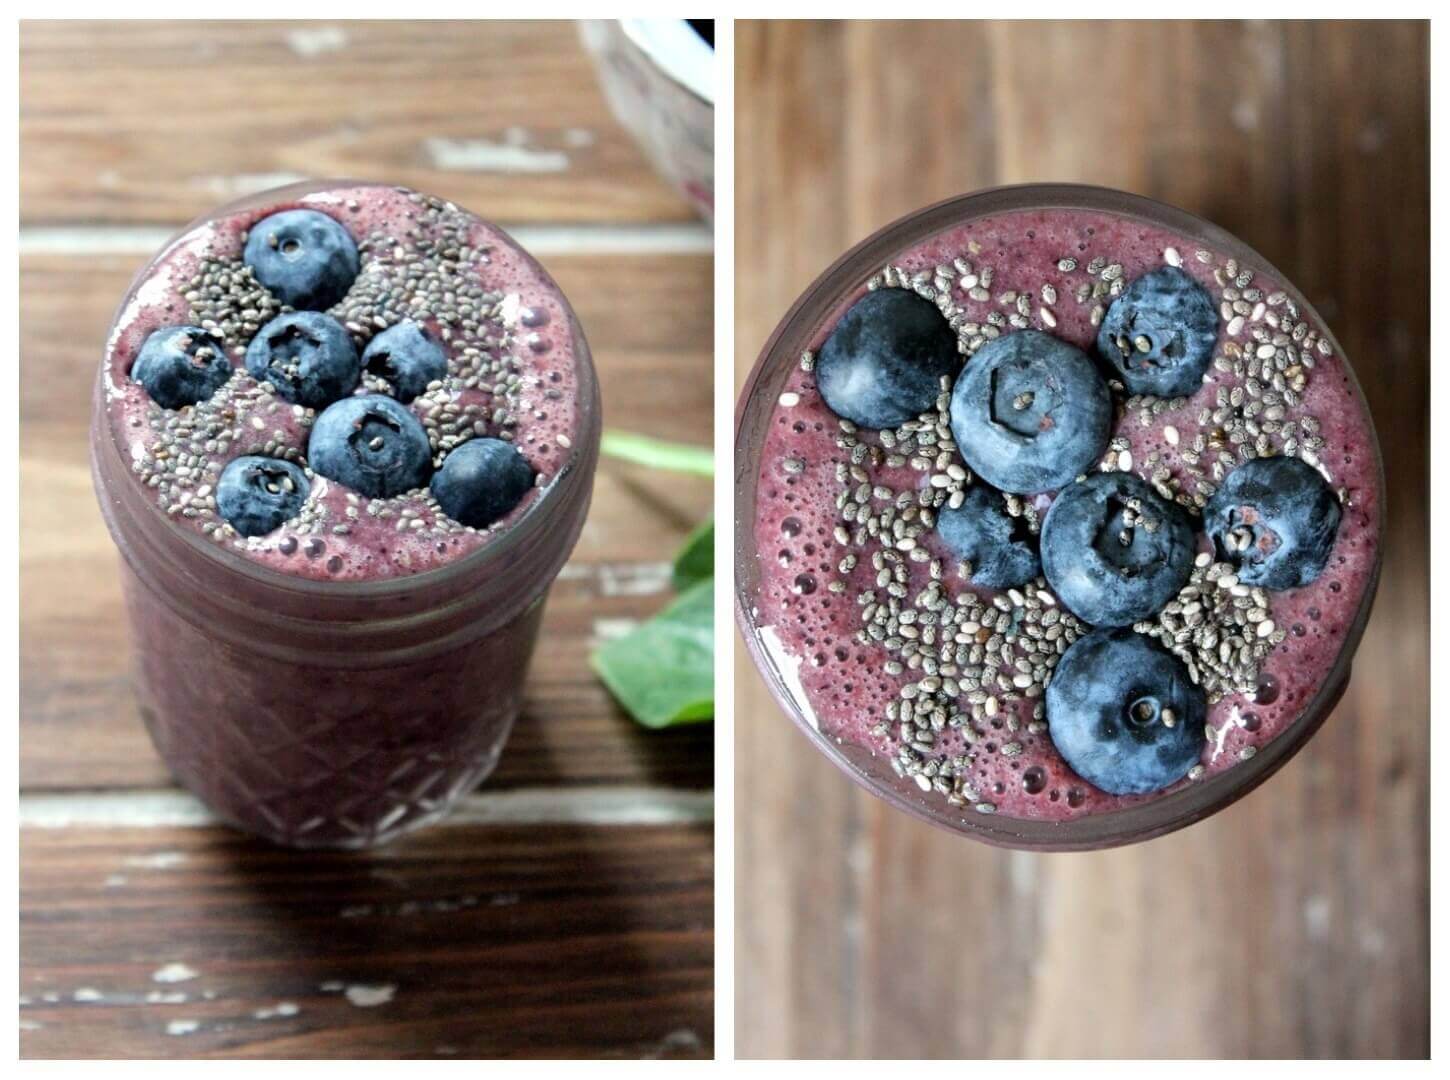  33 HEALTHY Green Drinks For St Patrick's Day Wild Blueberry Banana Spinach Power Smoothie